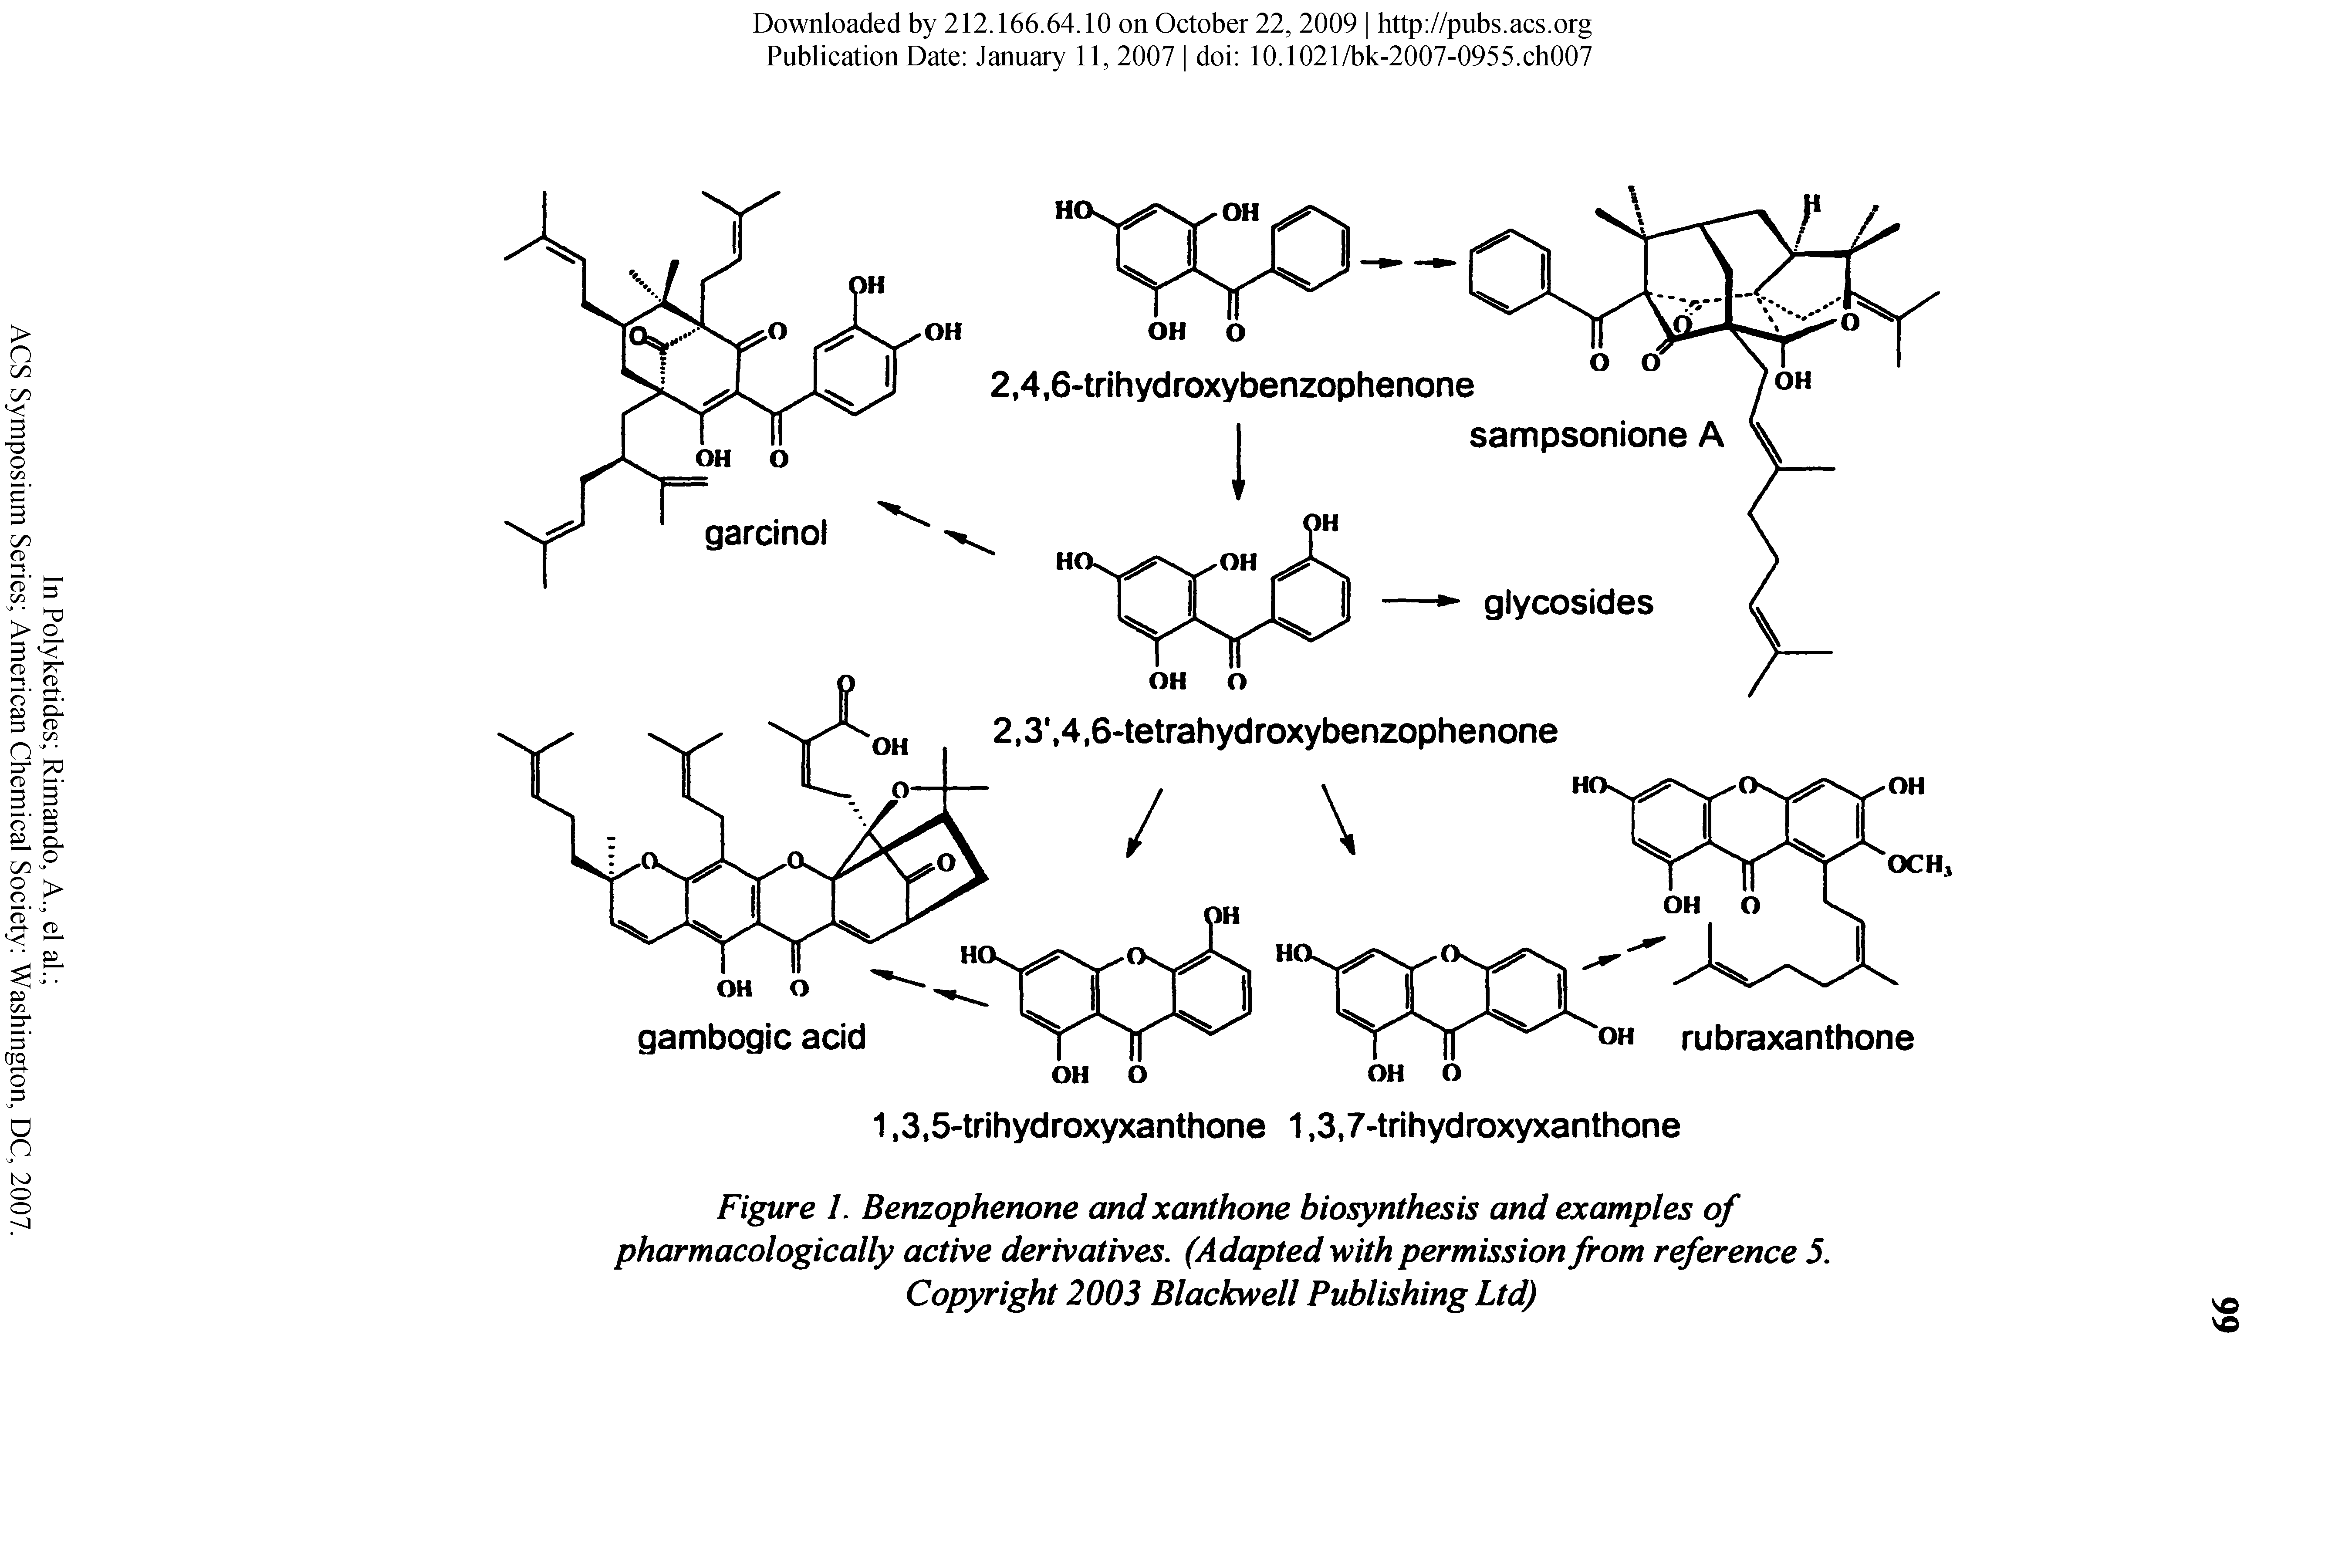 Figure I. Benzophenone and xanthone biosynthesis and examples of pharmacologically active derivatives. (Adapted with permission from reference 5. Copyright 2003 Blackwell Publishing Ltd)...